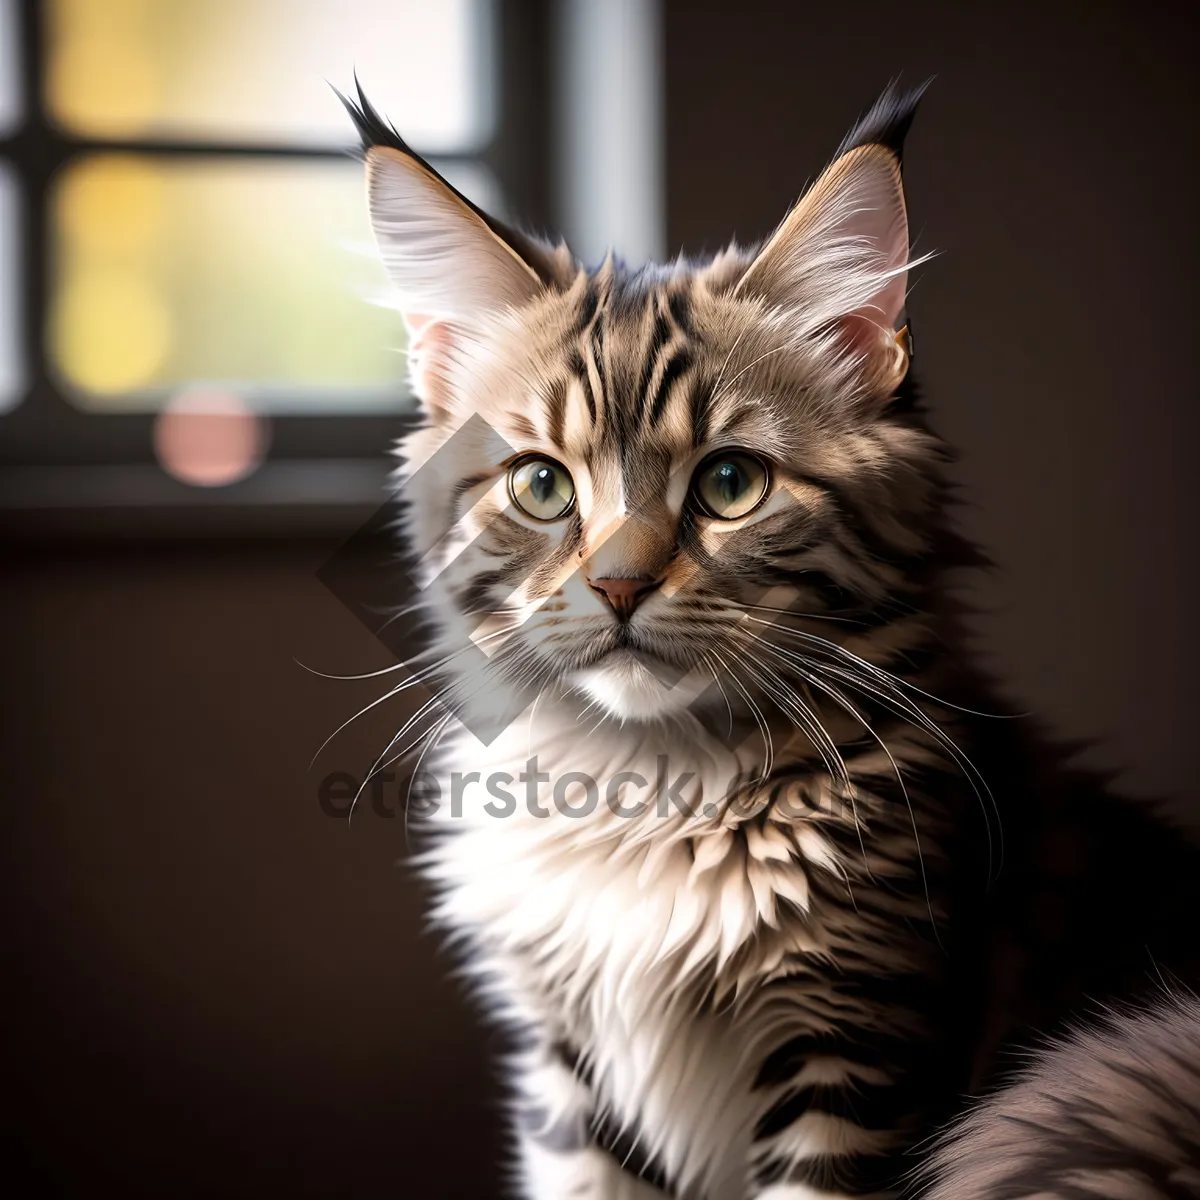 Picture of Adorable Tabby Kitty with Playful Whiskers